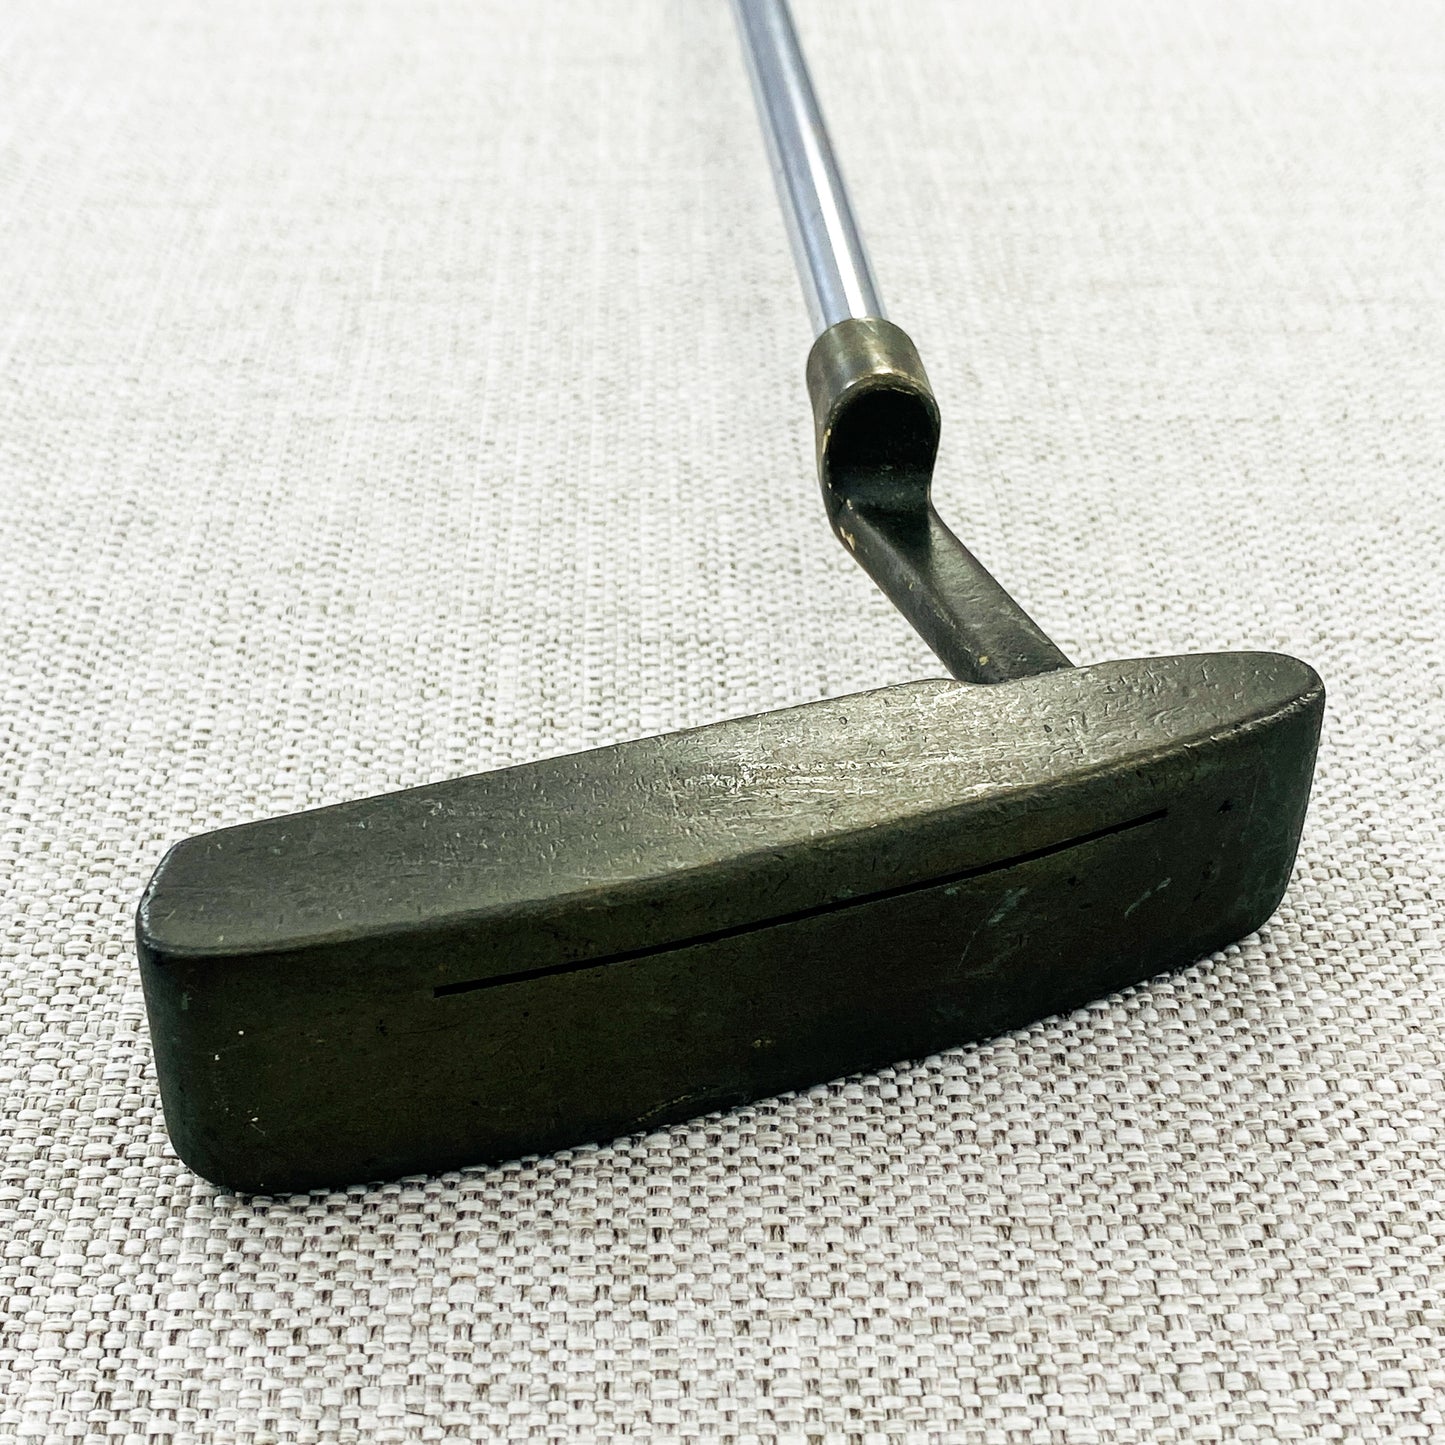 PING Anser Manganese Bronze Putter. 35 inch - Good Condition # T792